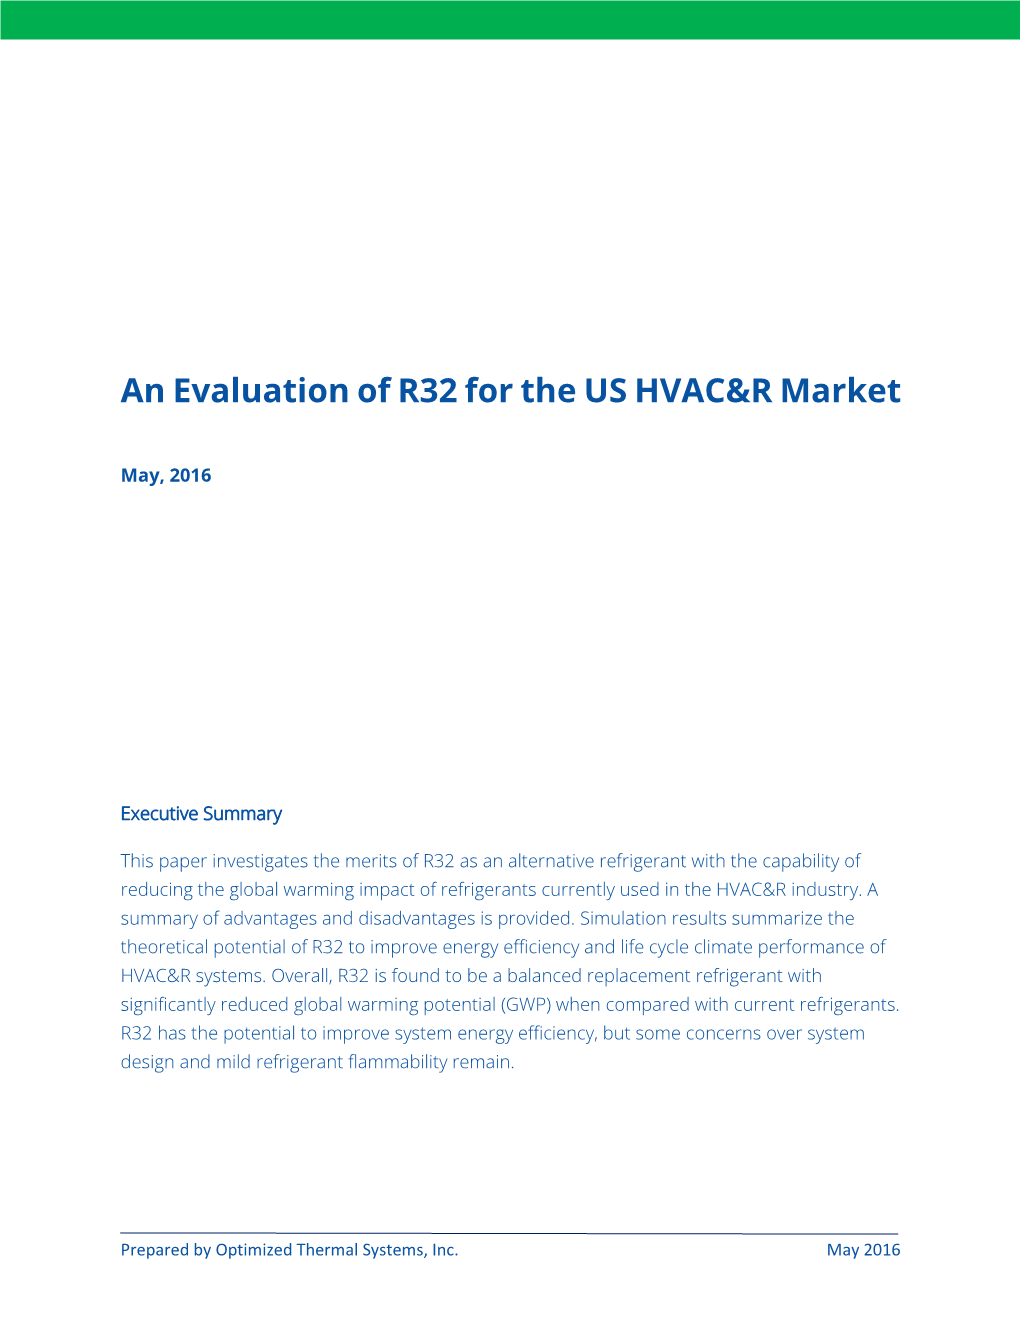 An Evaluation of R32 for the US HVAC&R Market